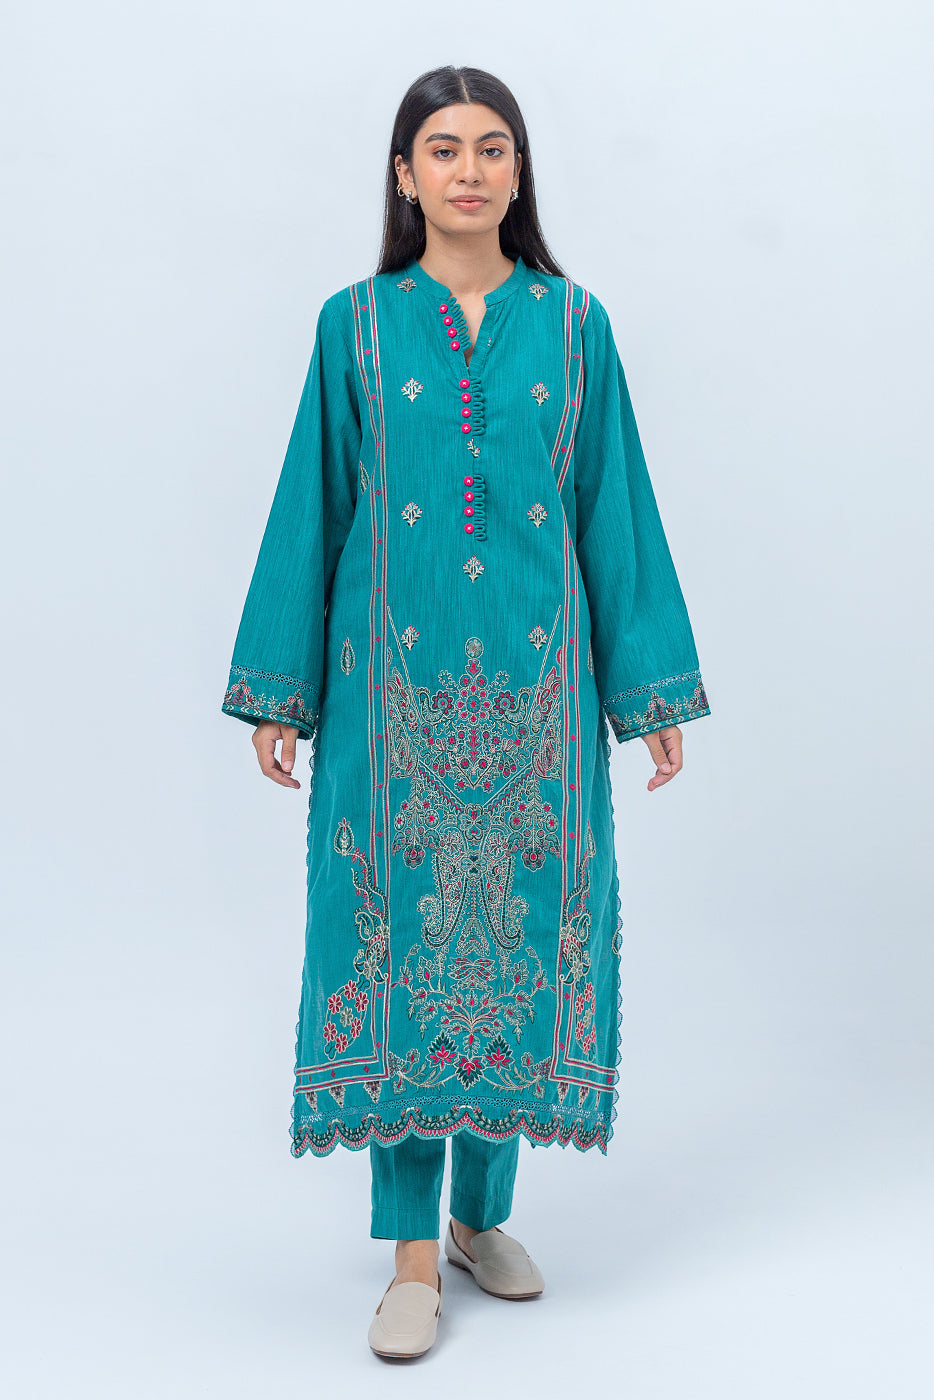 2 PIECE - EMBROIDERED KHADDAR SUIT - VIRIDIAN TEAL (UNSTITCHED) - BEECHTREE